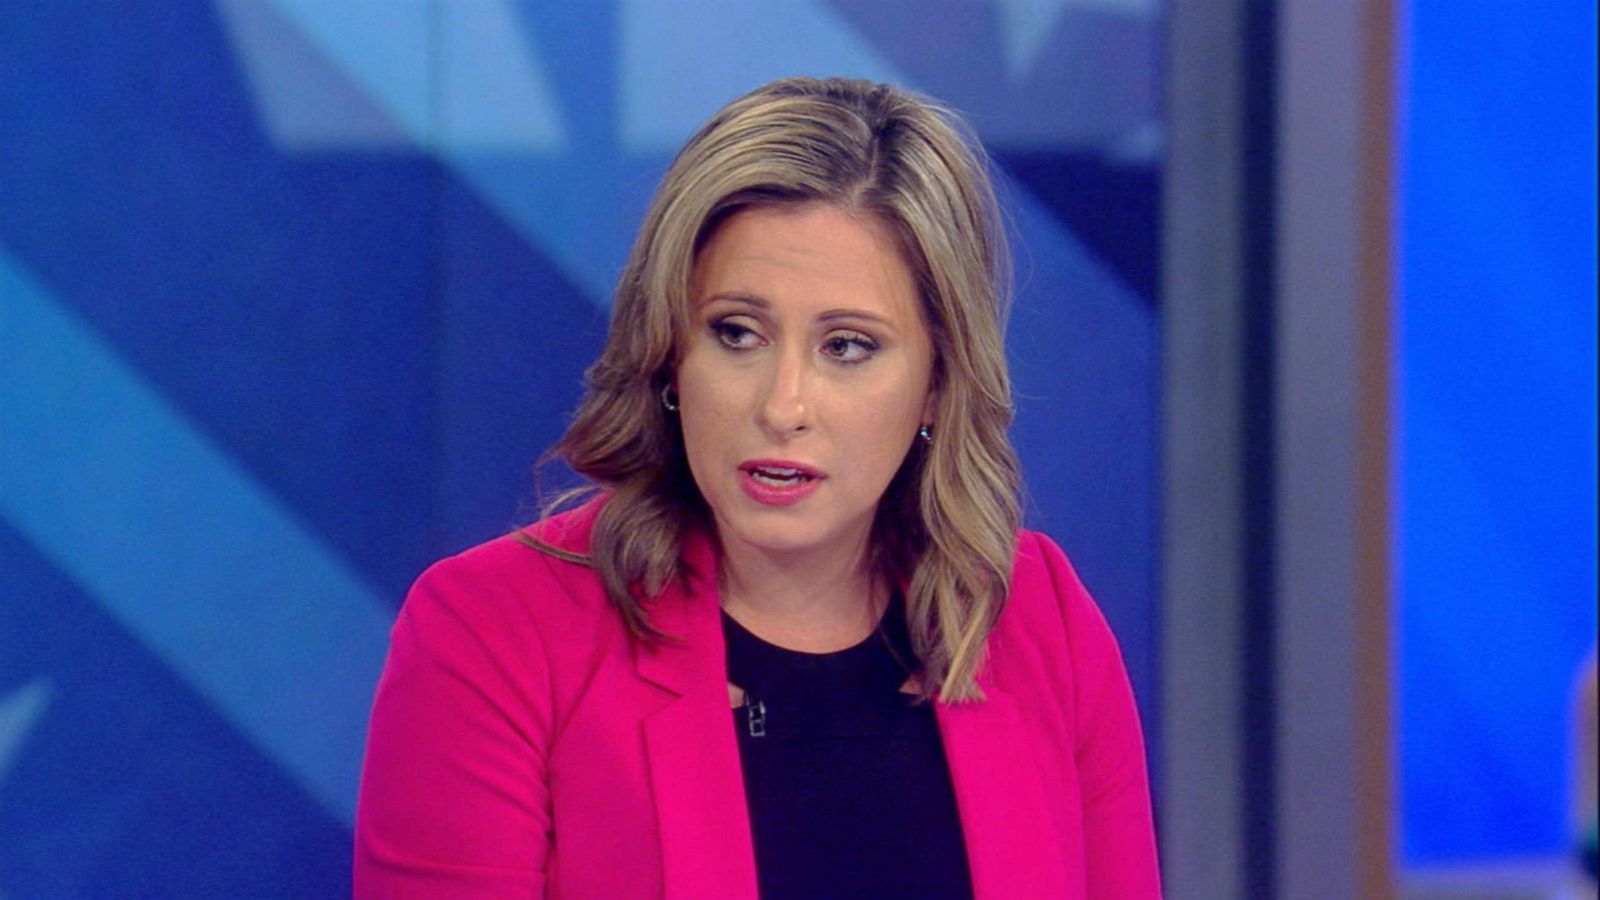 Hd Lantry Sex - Reflecting on her 2019 scandal, former Rep. Katie Hill says she still  hasn't 'fully recovered' - Good Morning America